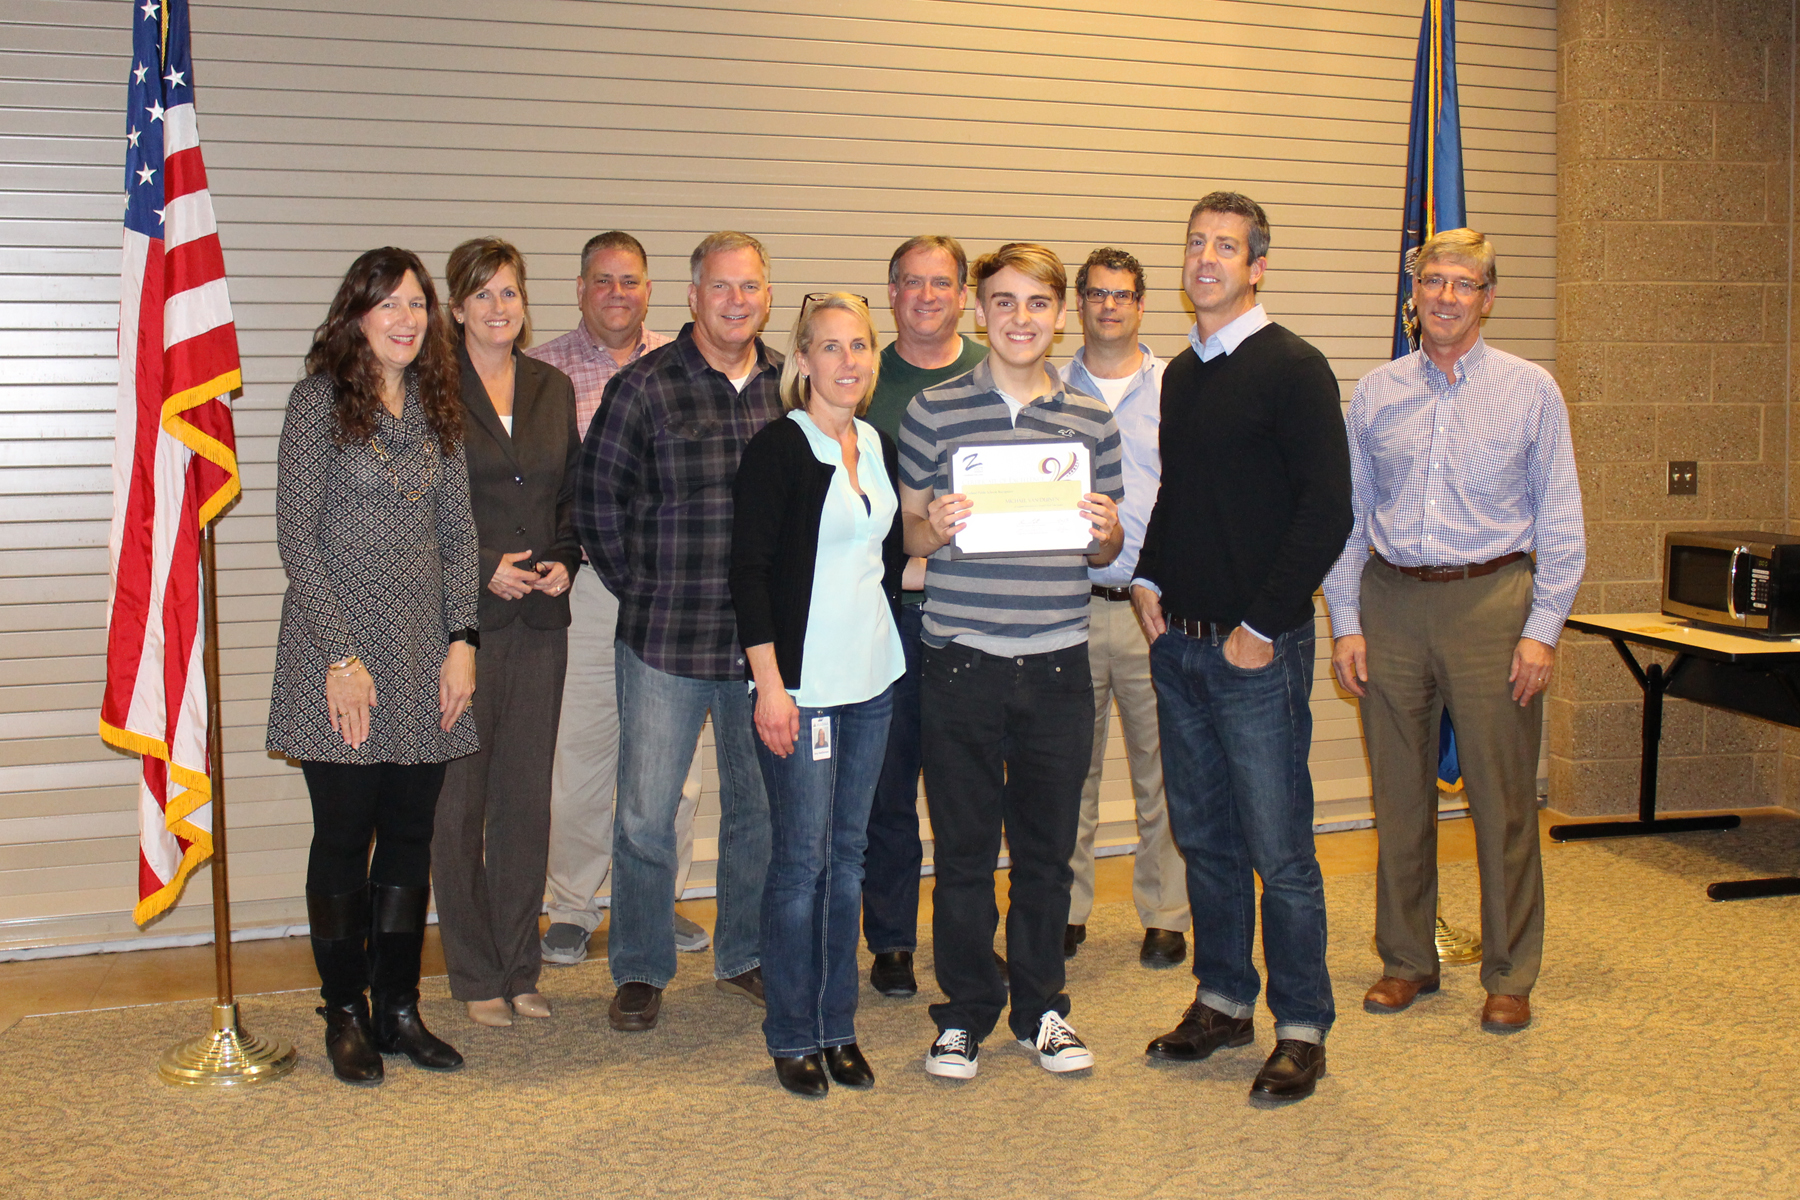 Michael VanDuinen, ZEHS senior, was honored by the Board of Education for being a National Merit Semi Finalist.